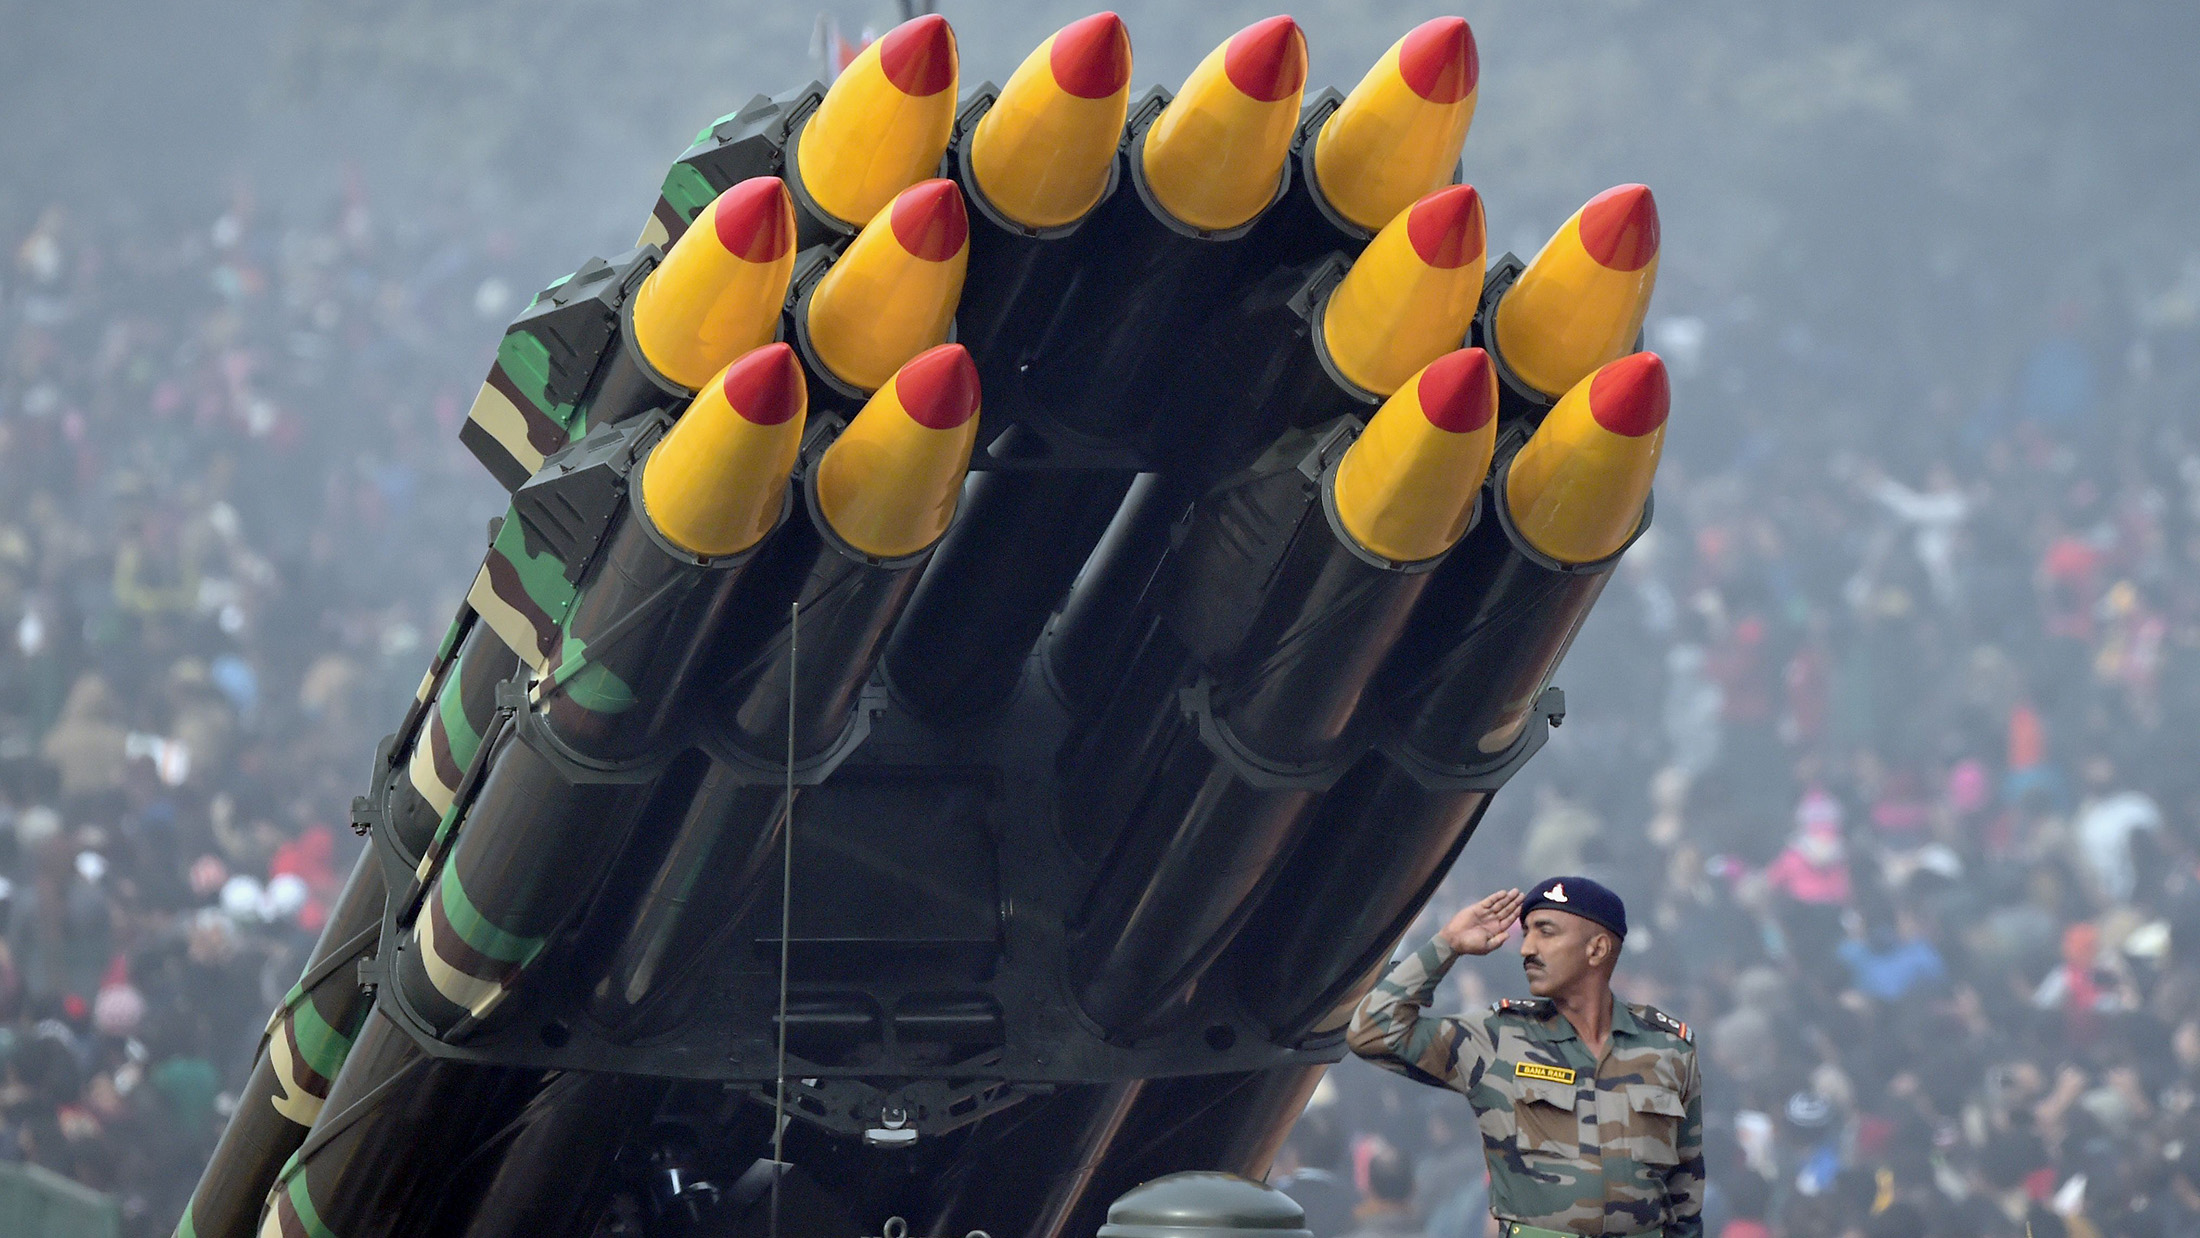 TOPSHOT - An Indian soldier salutes as he rides a Smerch rocket launcher during India's Republic Day parade in New Delhi on January 26, 2016. Thousands gathered in New Delhi amid tight security January 26 for India's annual Republic Day parade, a pomp-filled spectacle of military might featuring camels and daredevil stuntwomen, with French President Francois Hollande the chief guest. / AFP / ROBERTO SCHMIDT (Photo credit should read ROBERTO SCHMIDT/AFP/Getty Images)
